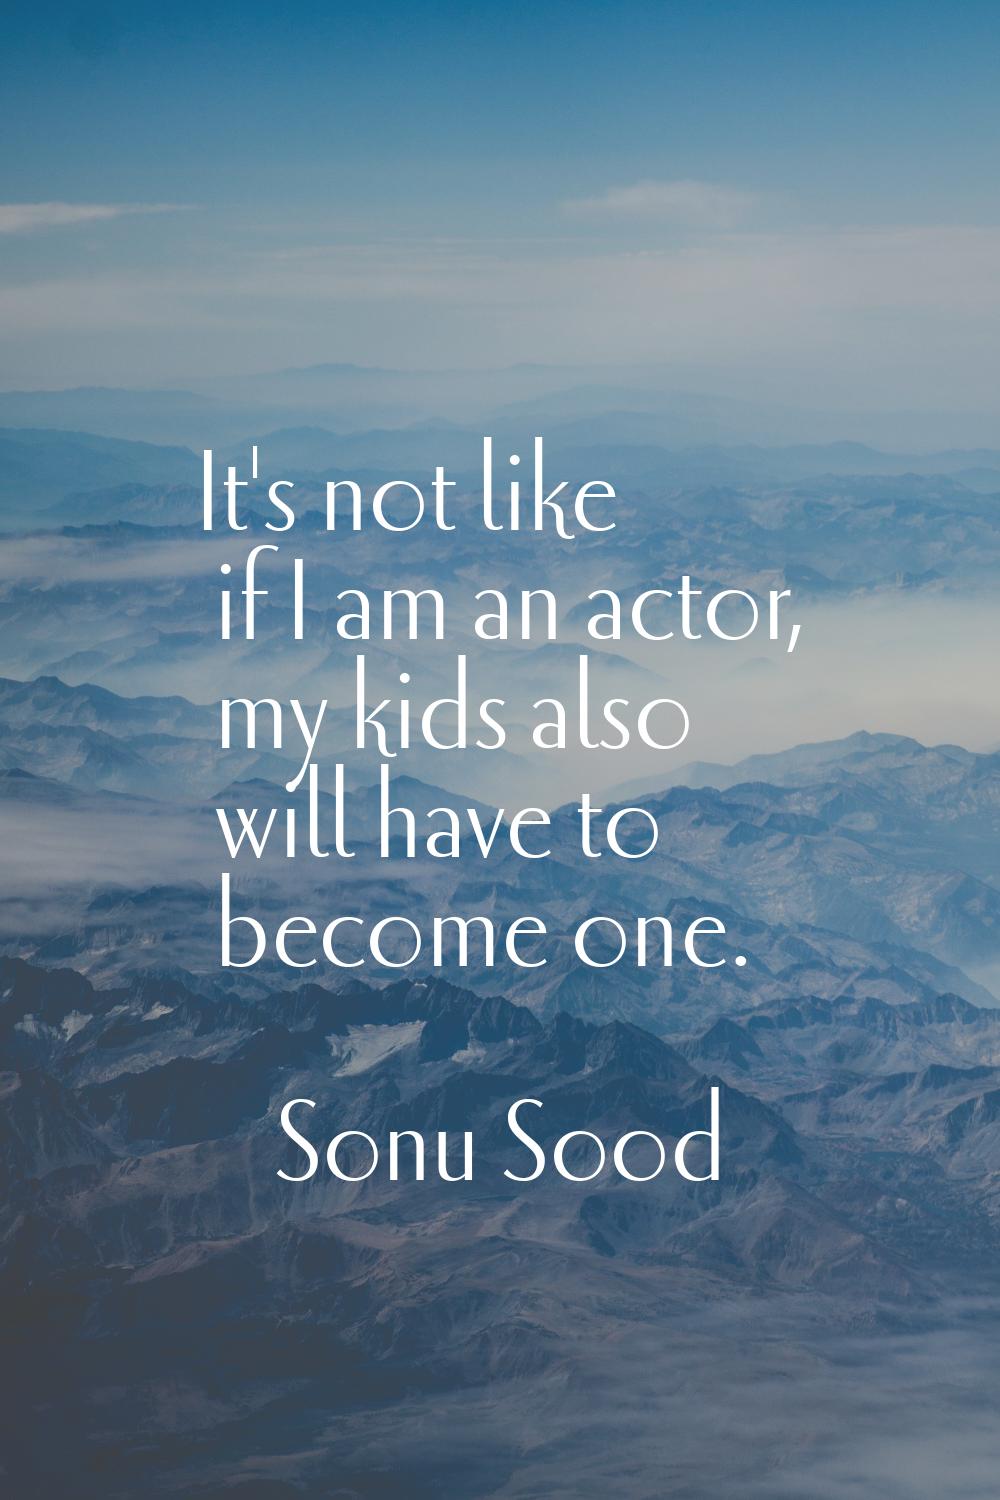 It's not like if I am an actor, my kids also will have to become one.